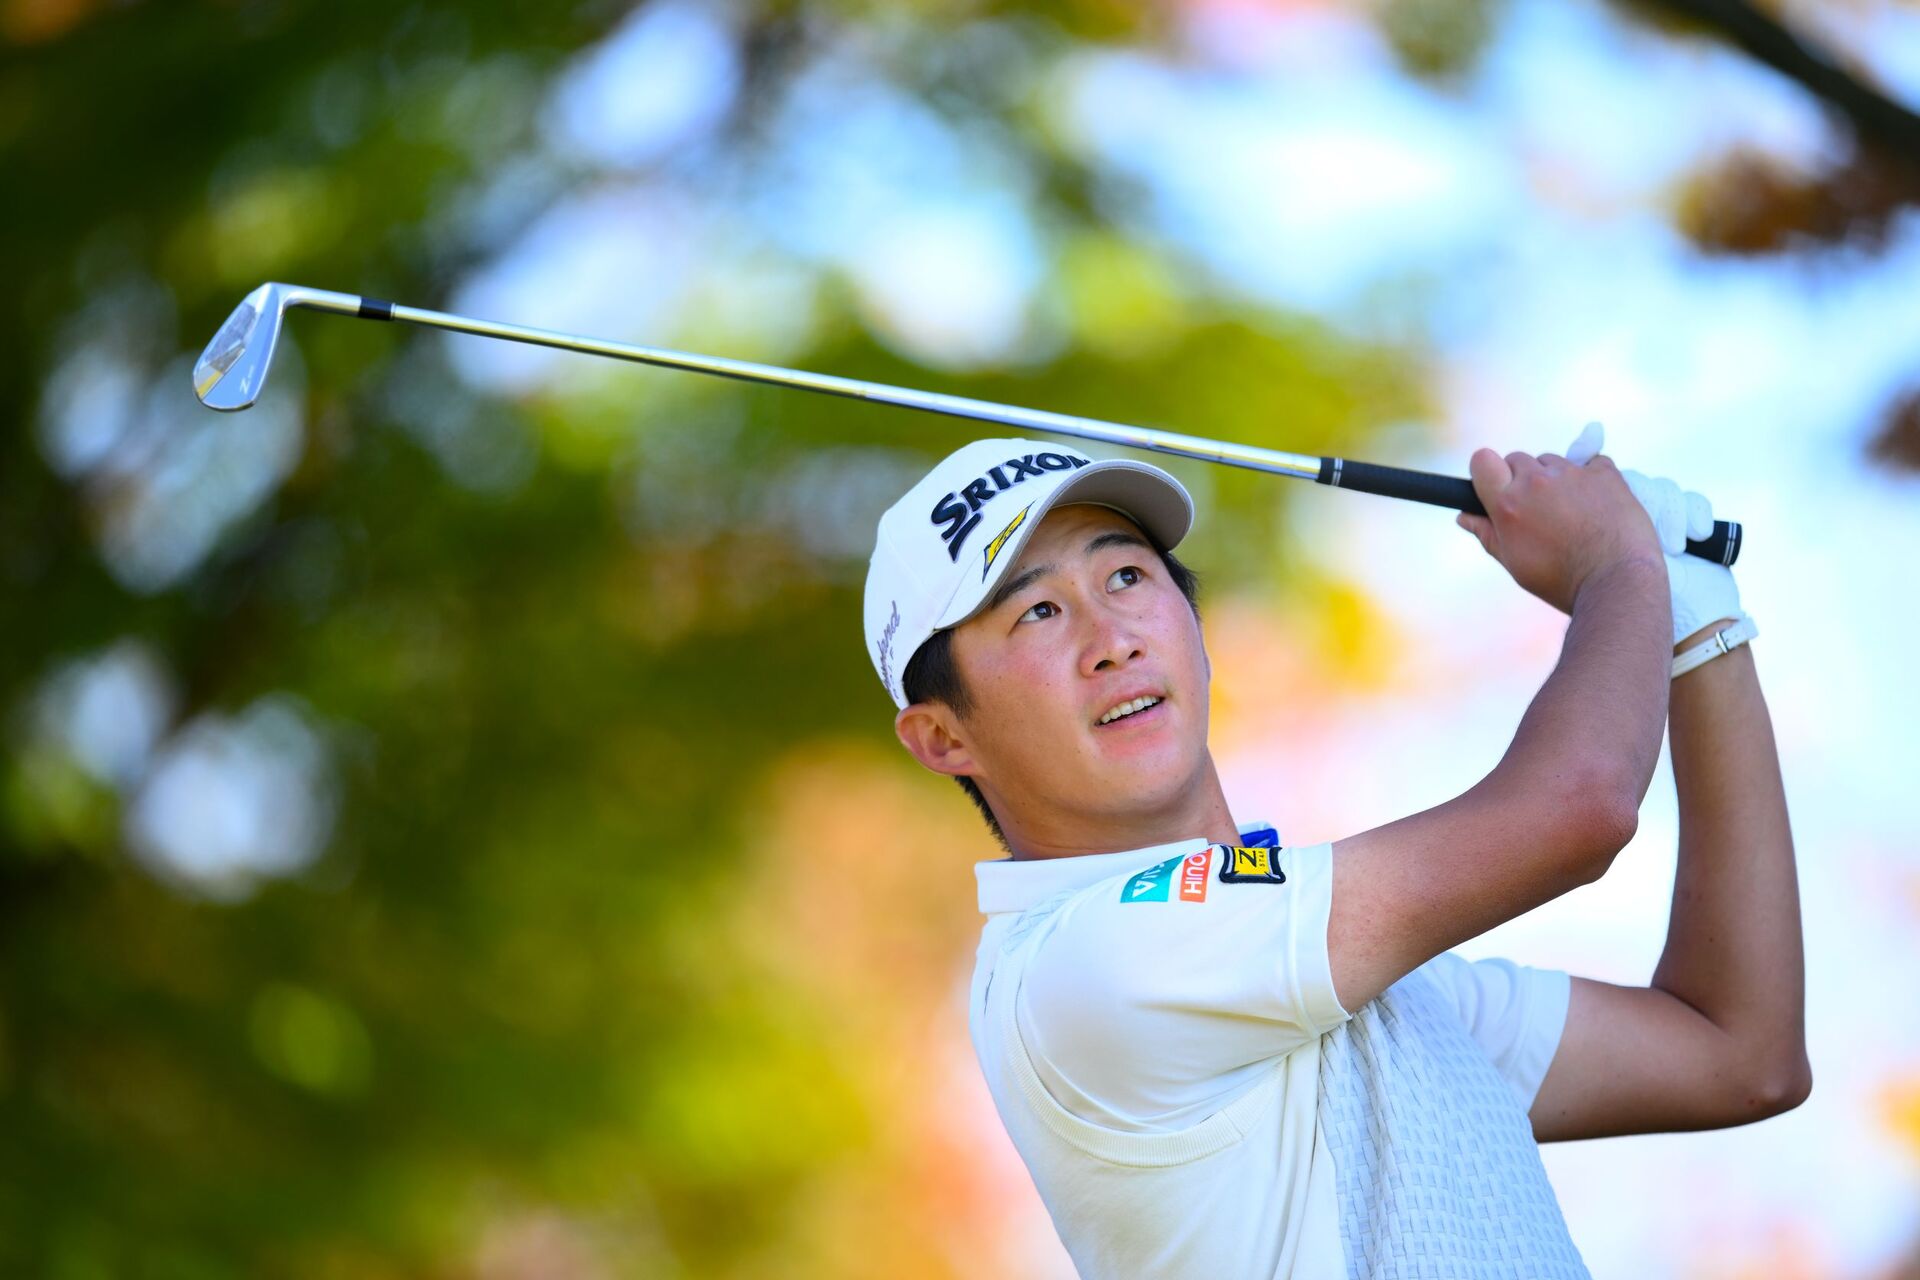 Last-minute entrant Hoshino impresses with top 10 finish in UAE